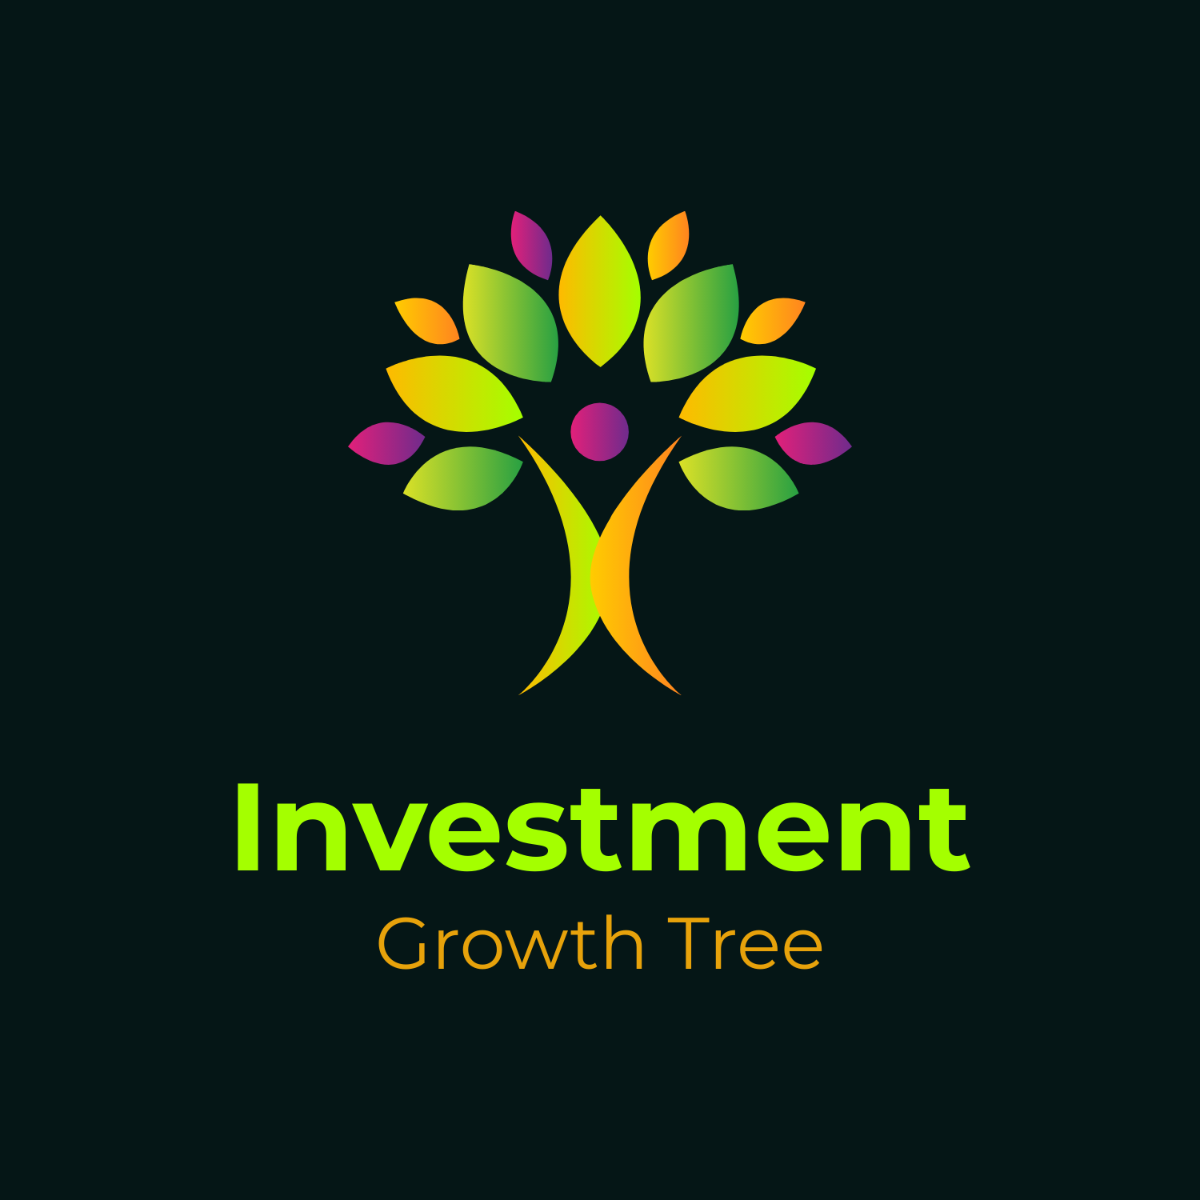 Investment Growth Tree Logo Template